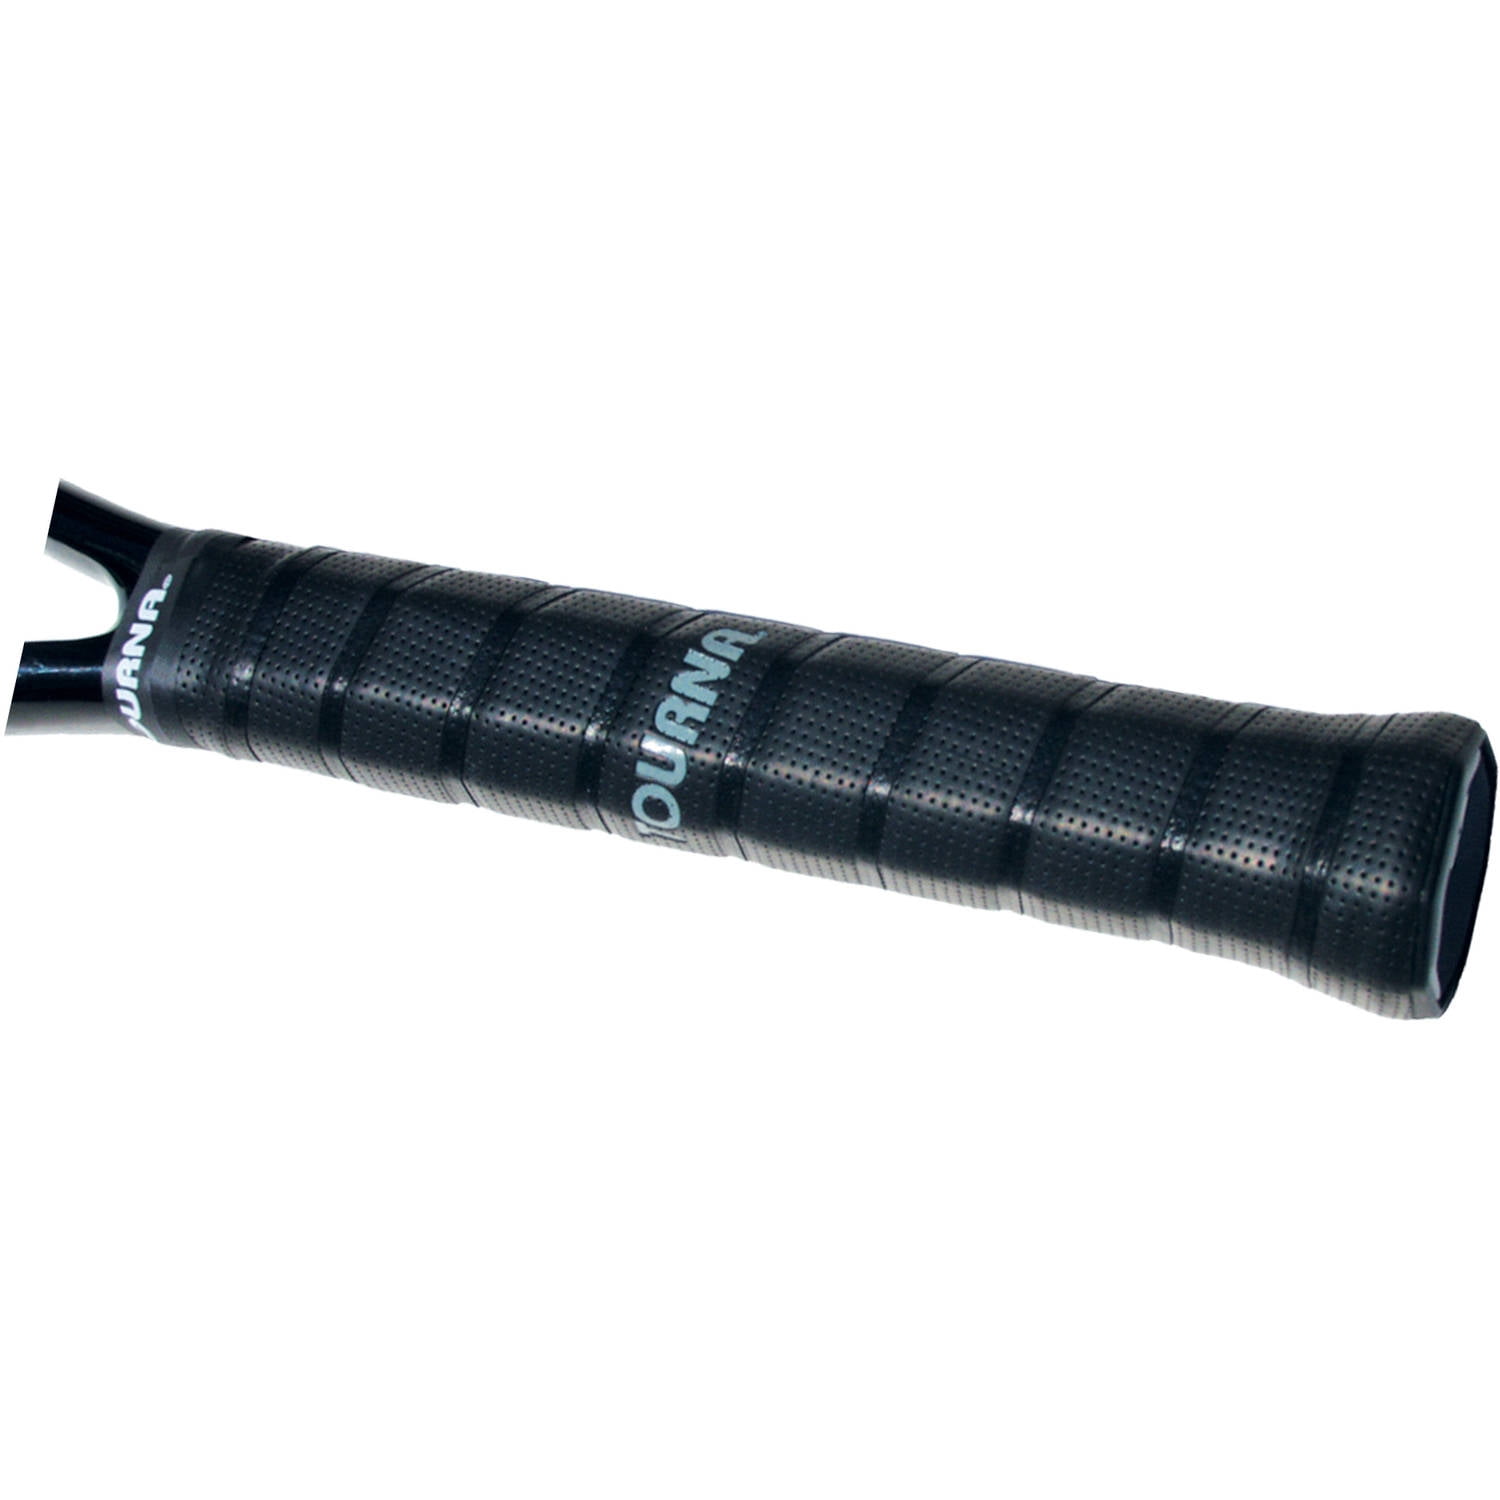 Tourna Pro Tour Thin Replacement Tennis Grip 1.5mm Black for sale online 